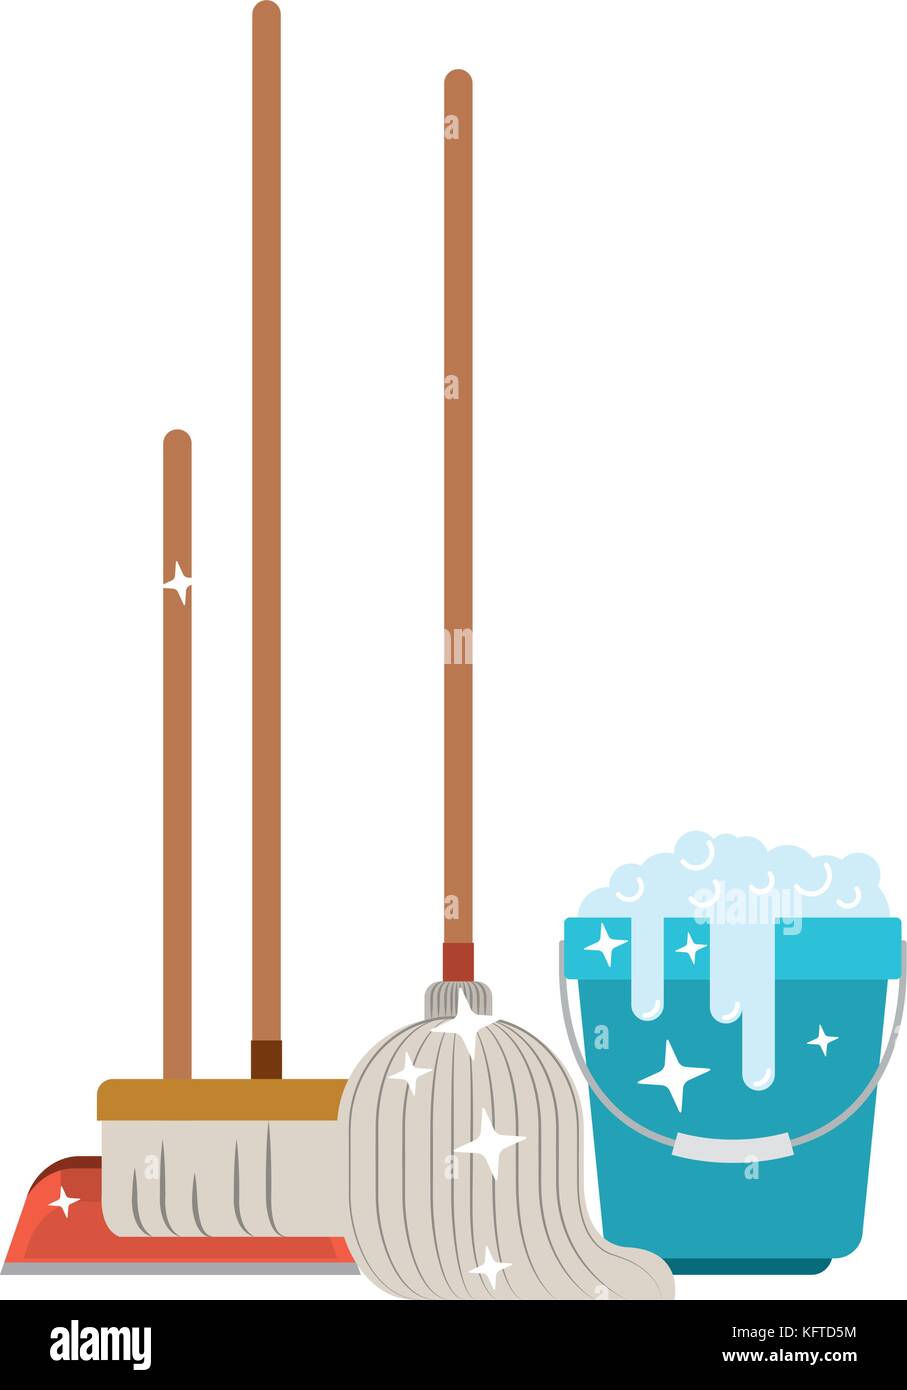 https://c8.alamy.com/comp/KFTD5M/dustpan-and-broom-and-mop-and-bucket-with-water-and-soap-detergent-KFTD5M.jpg